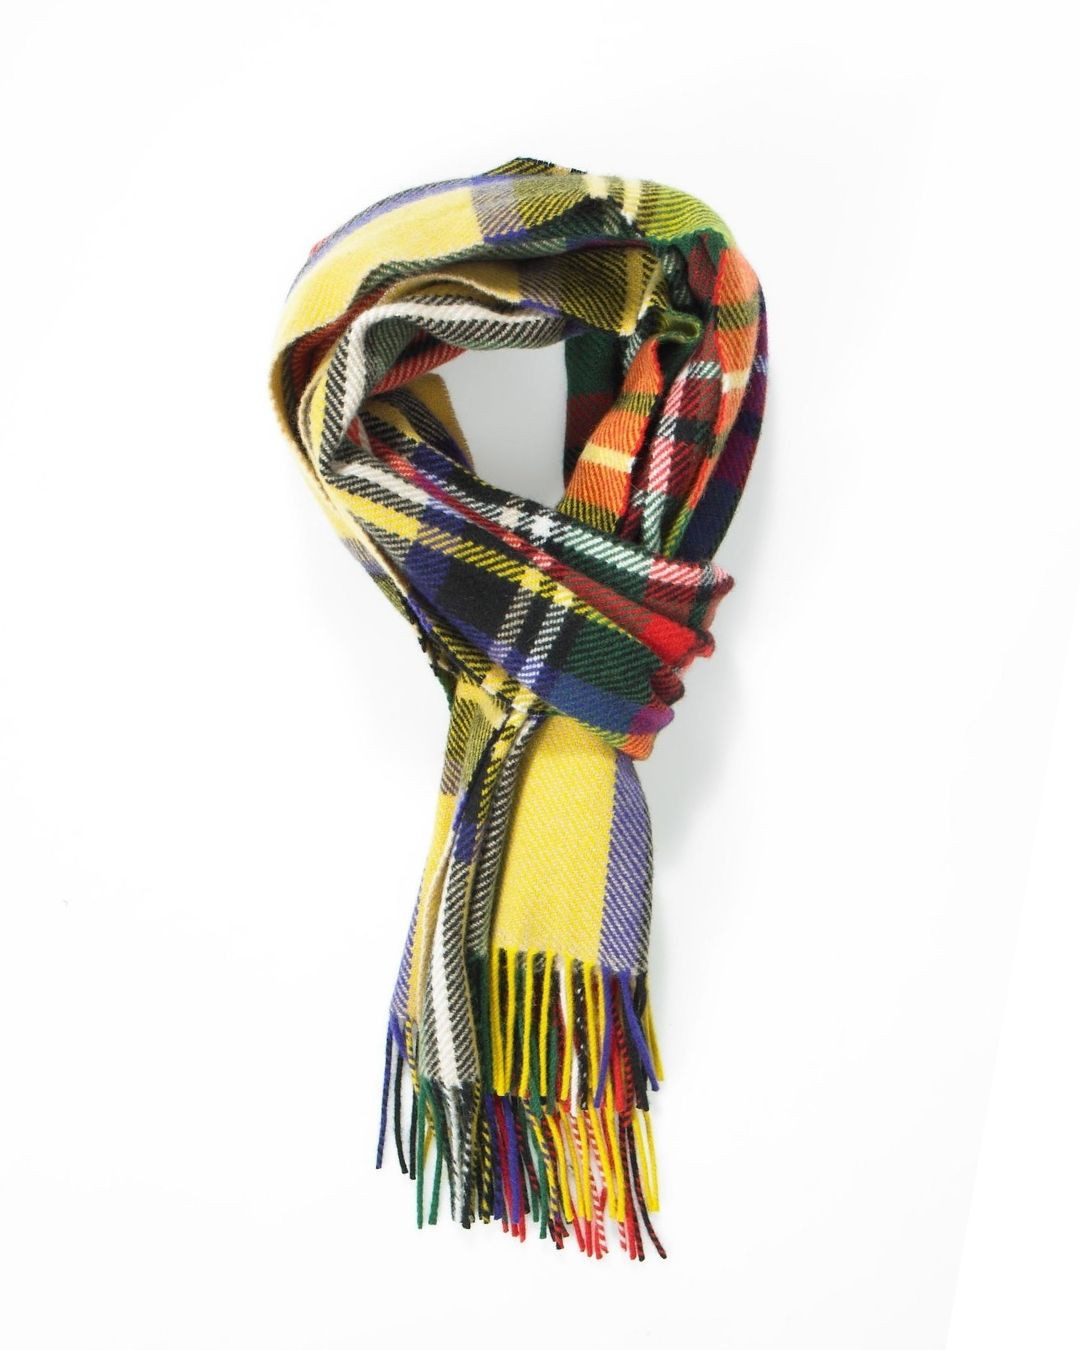 Multicolored tweed scarf for a man or woman